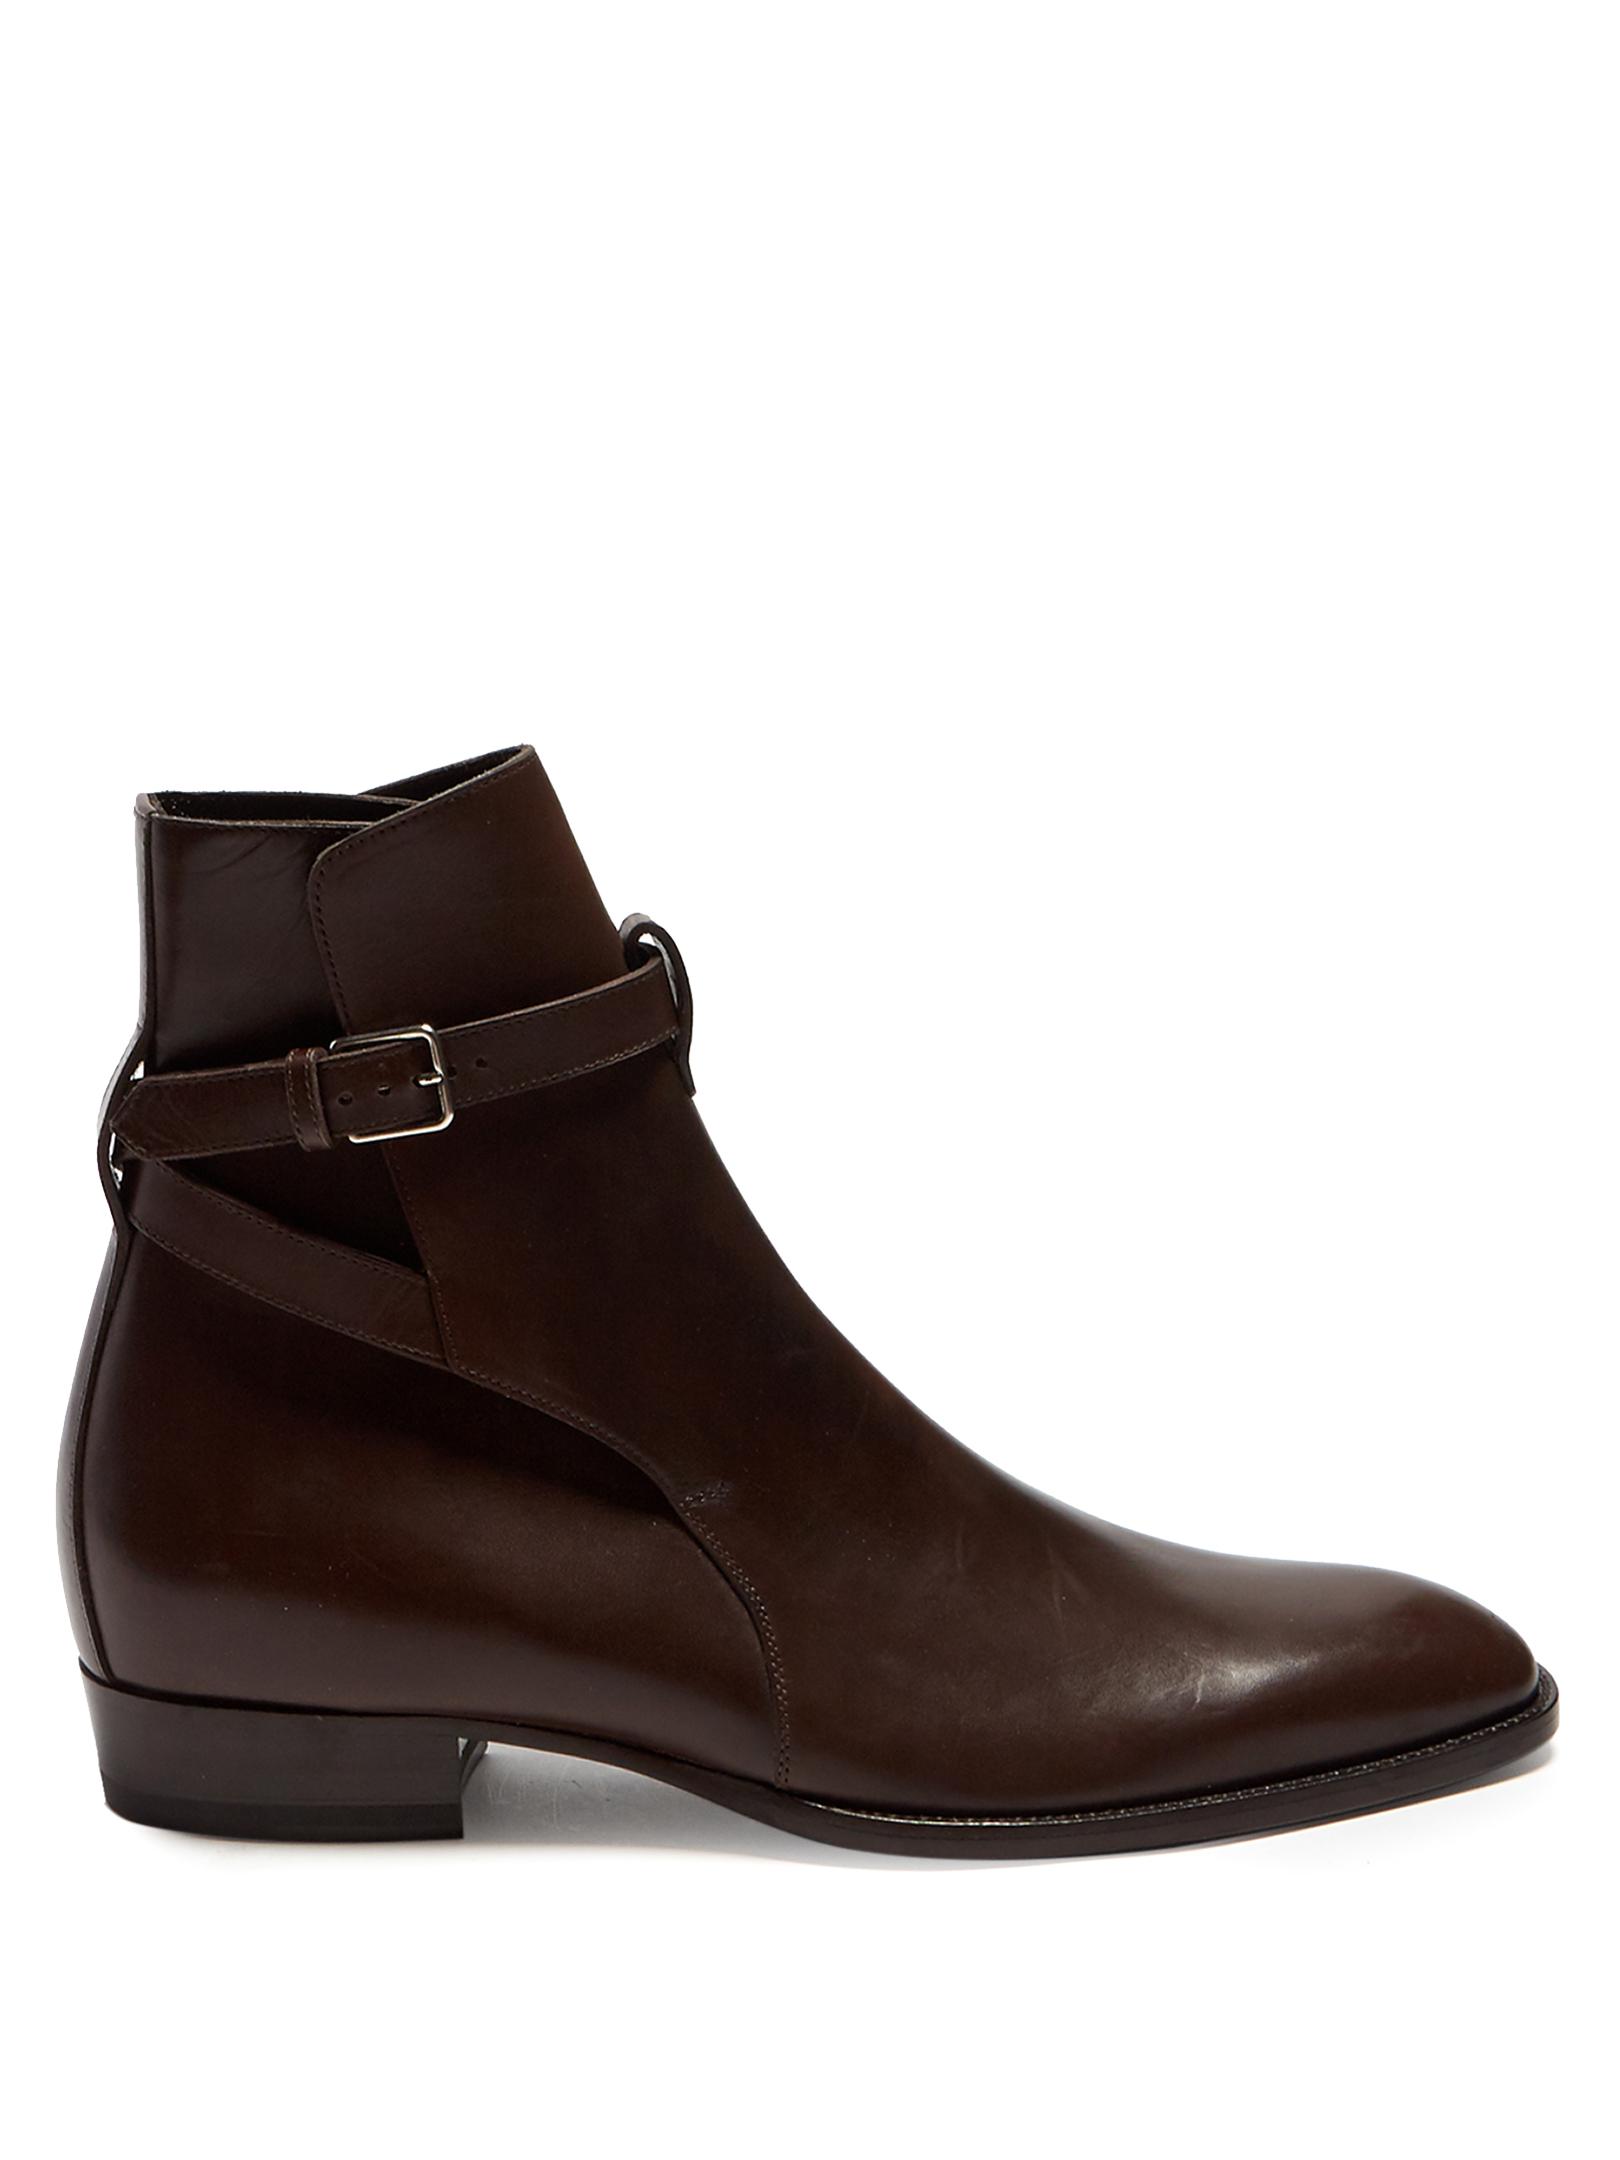 Saint Laurent Buckle-strap Leather Chelsea Boots in Brown for Men - Lyst